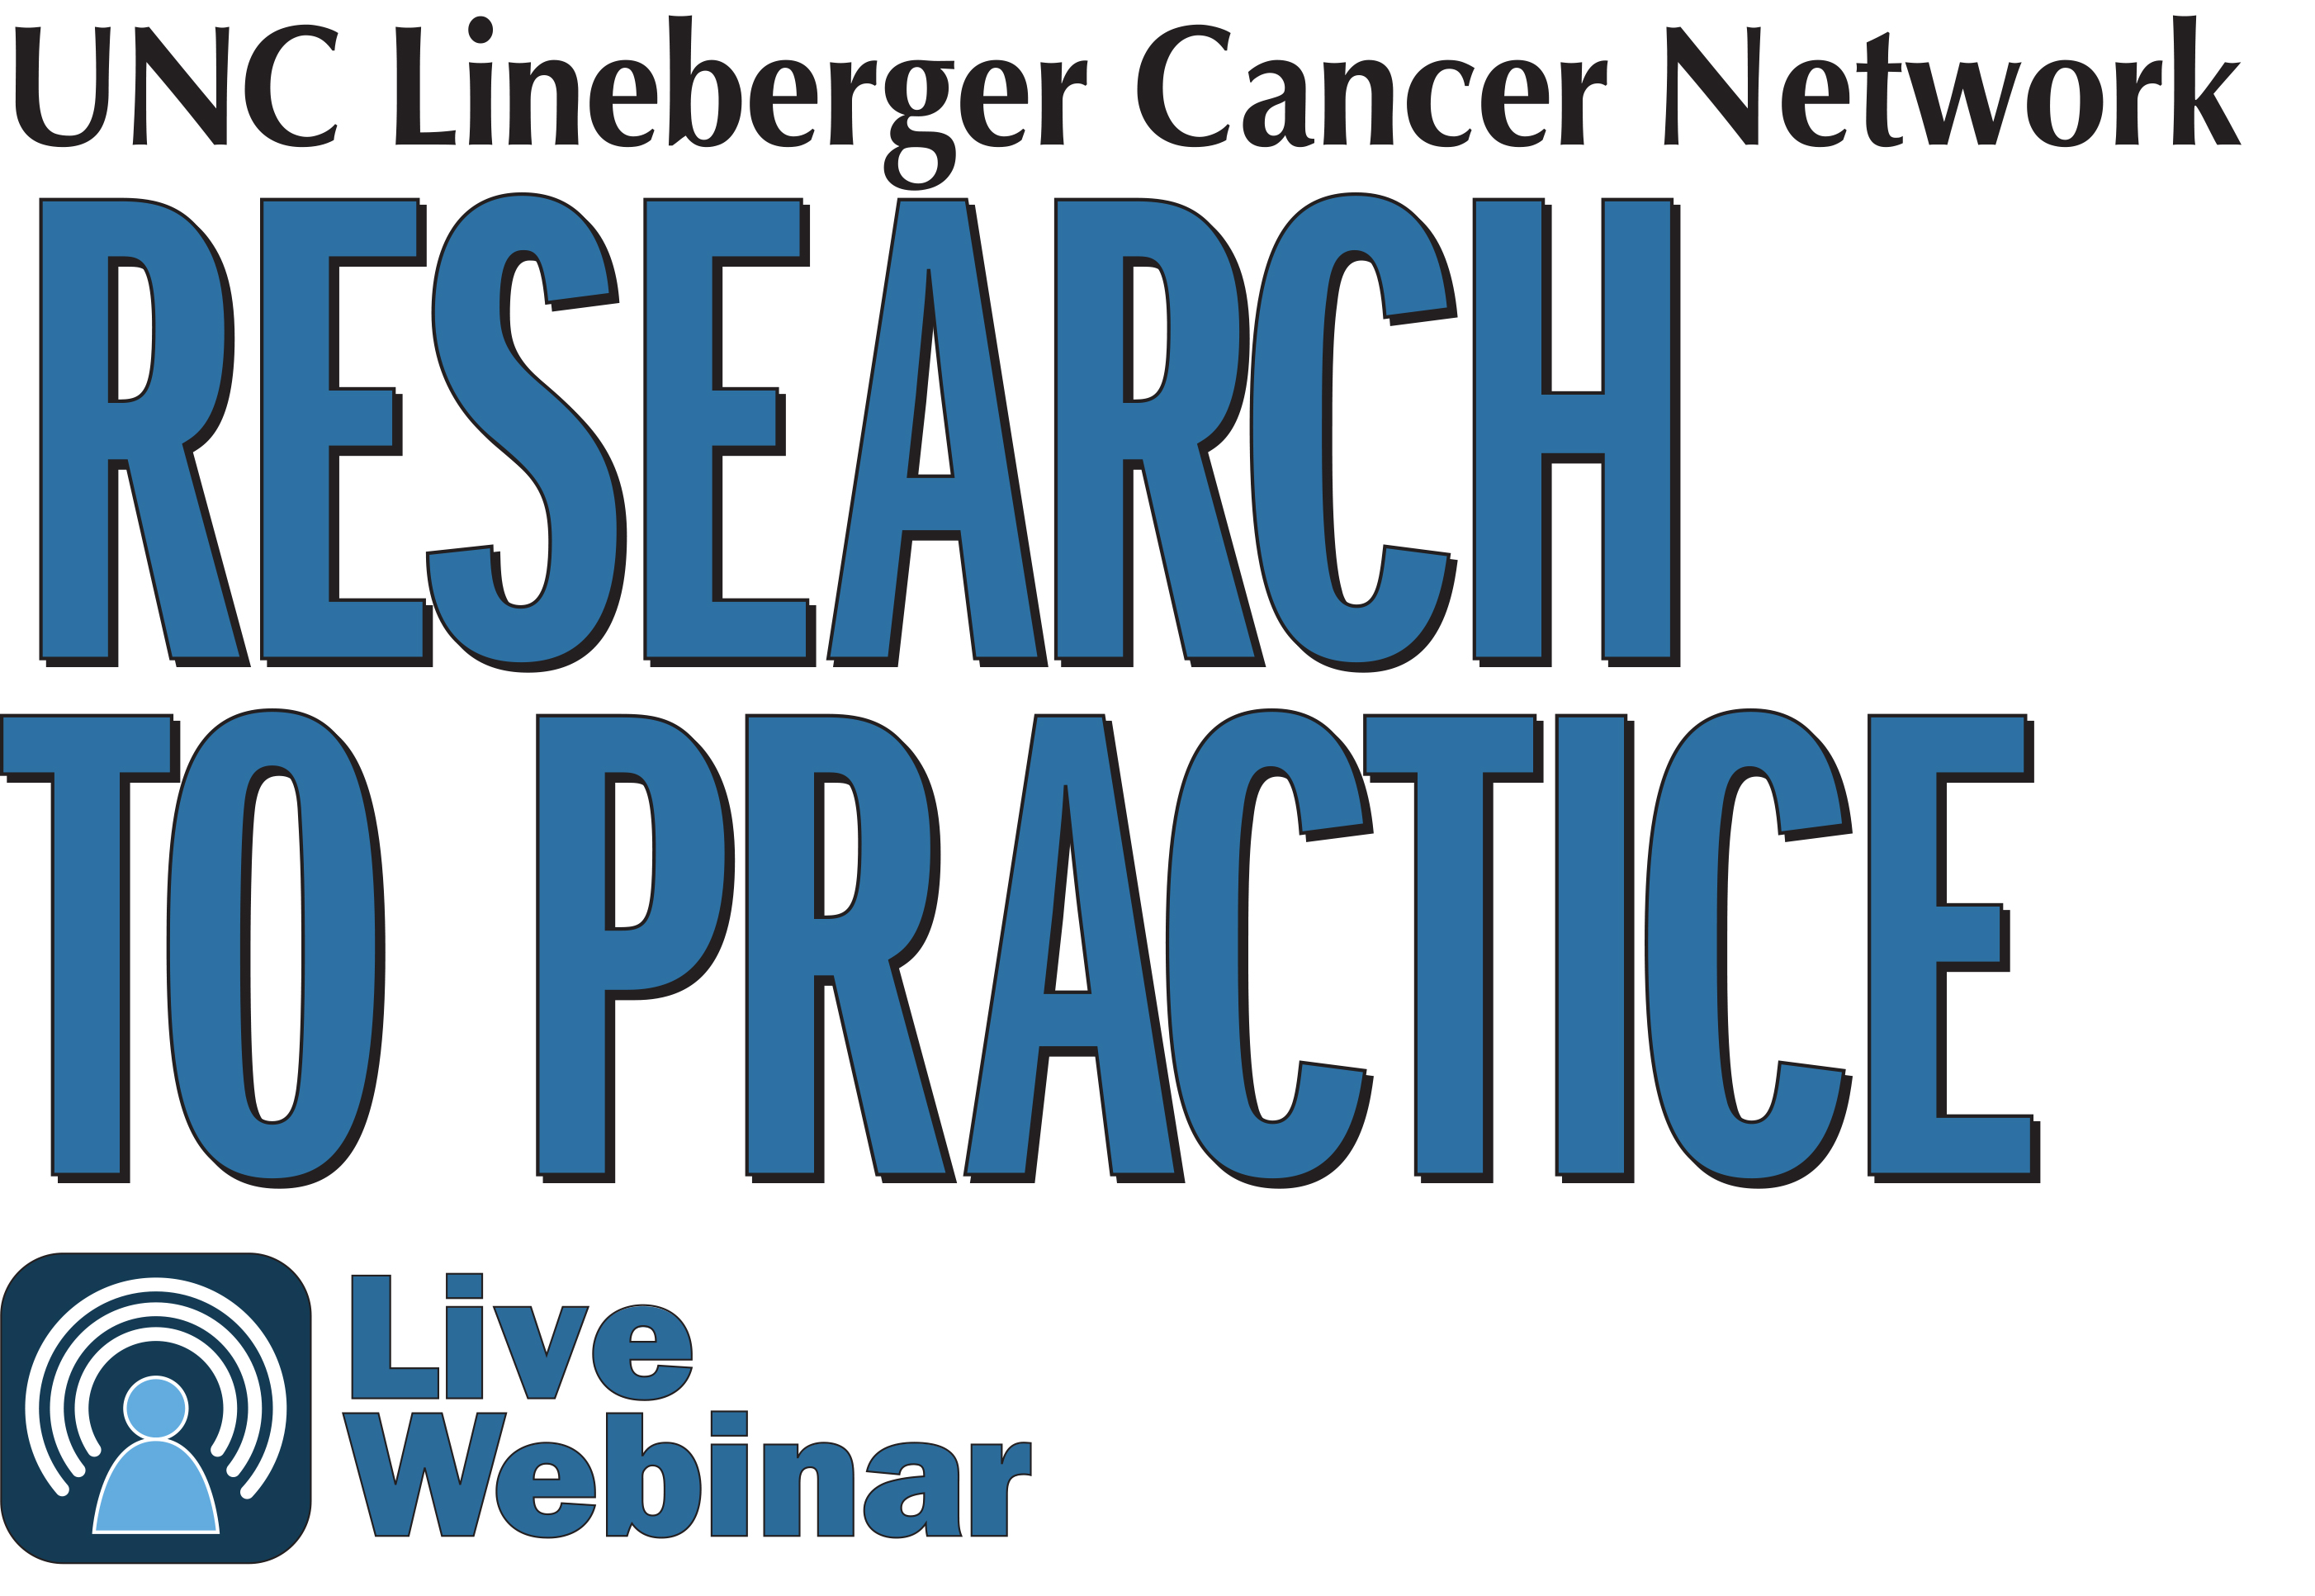 A UNCLCN Research to Practice Webinar